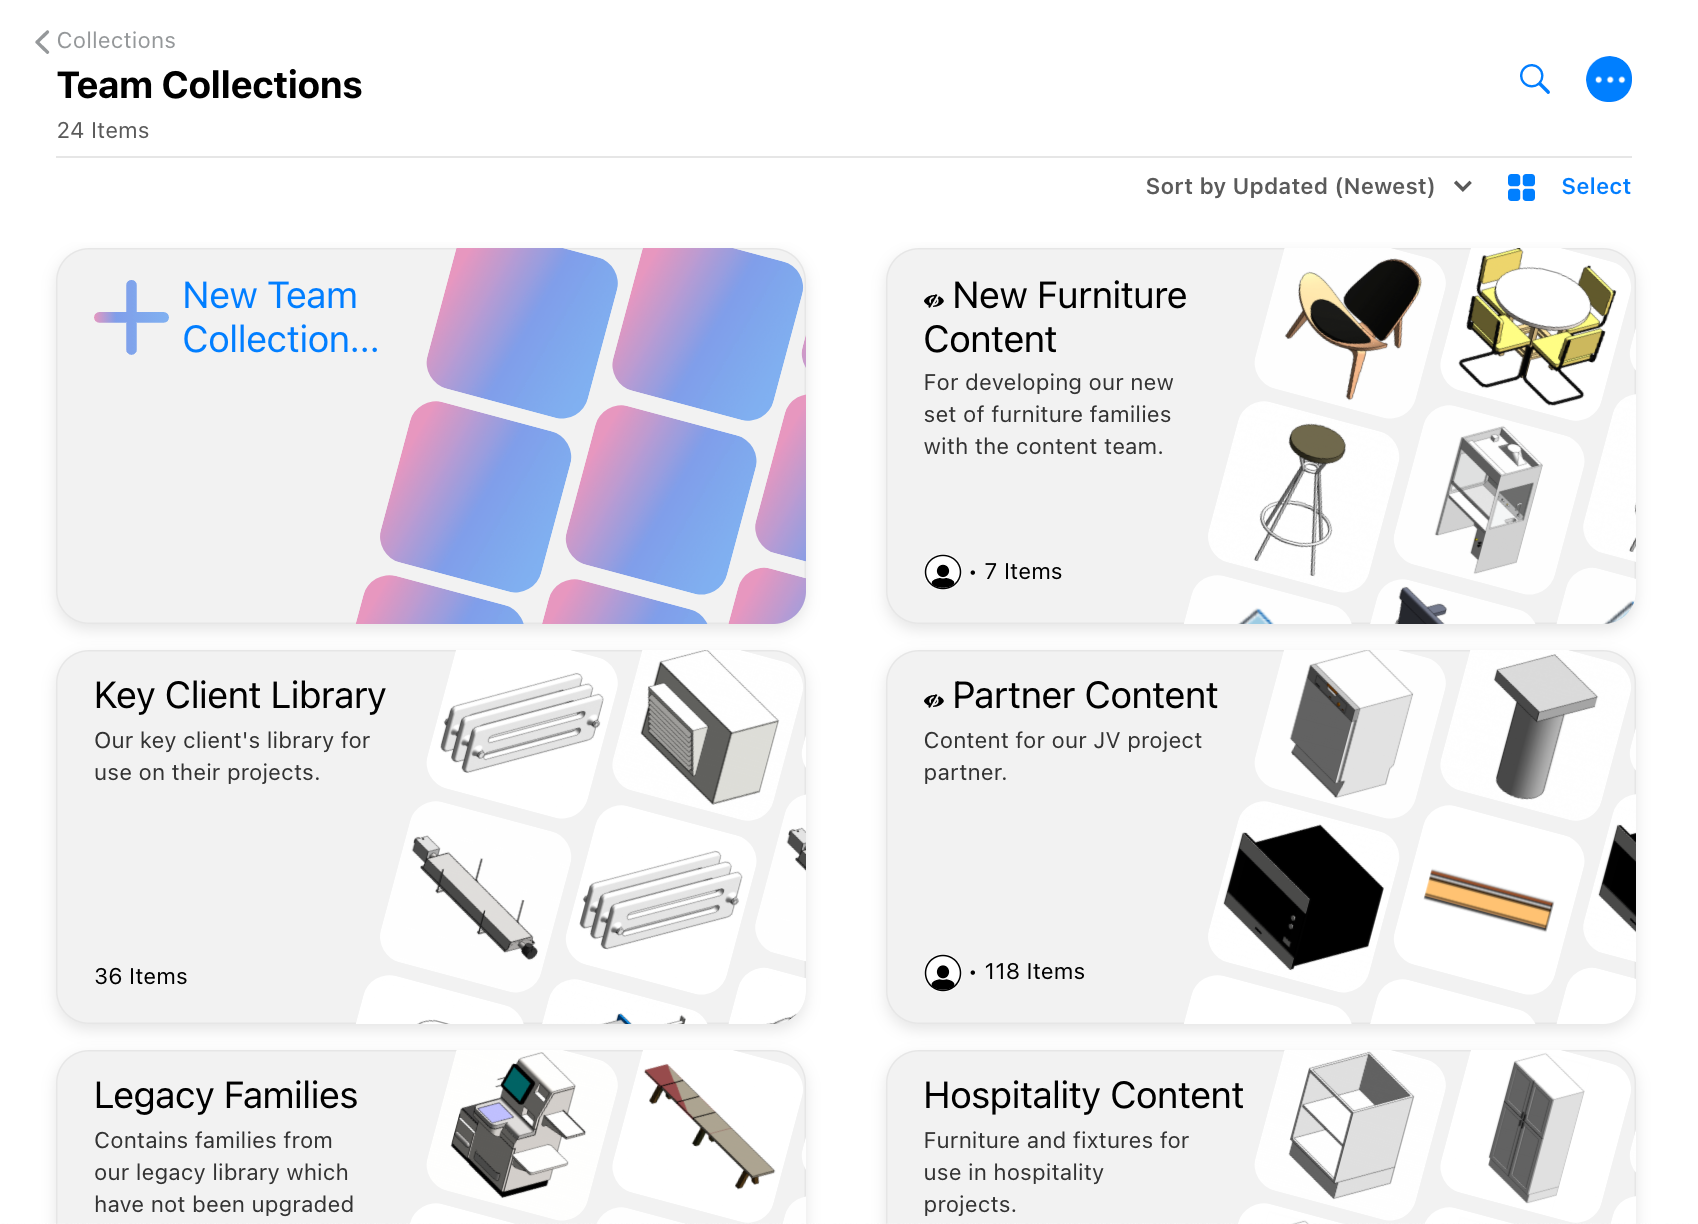 Team Collections landing page in Kinship.